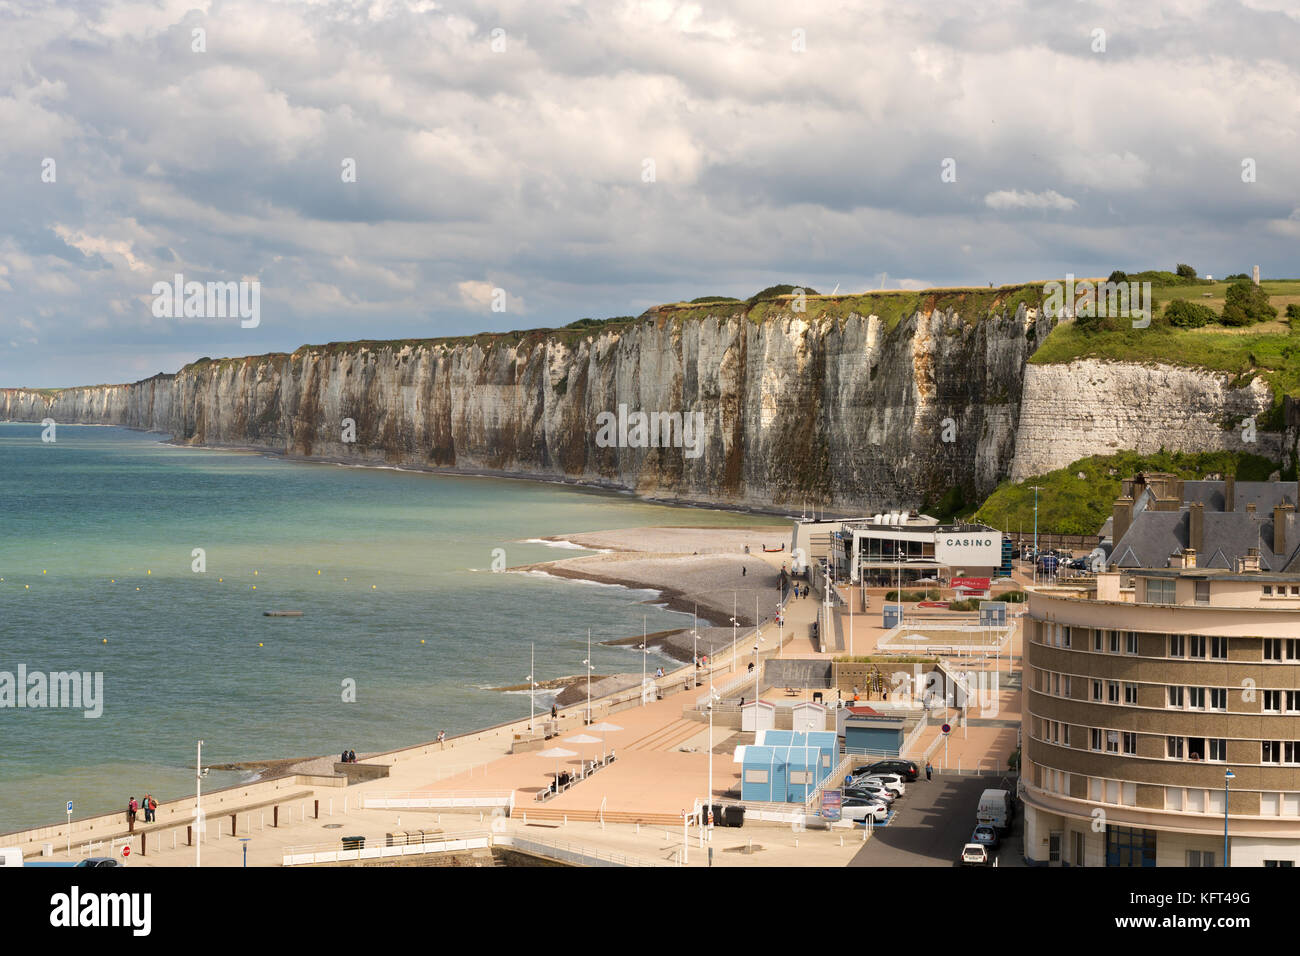 The seafront and white limestone cliffs at Saint Valery en Caux, Normandy, France, Europe Stock Photo